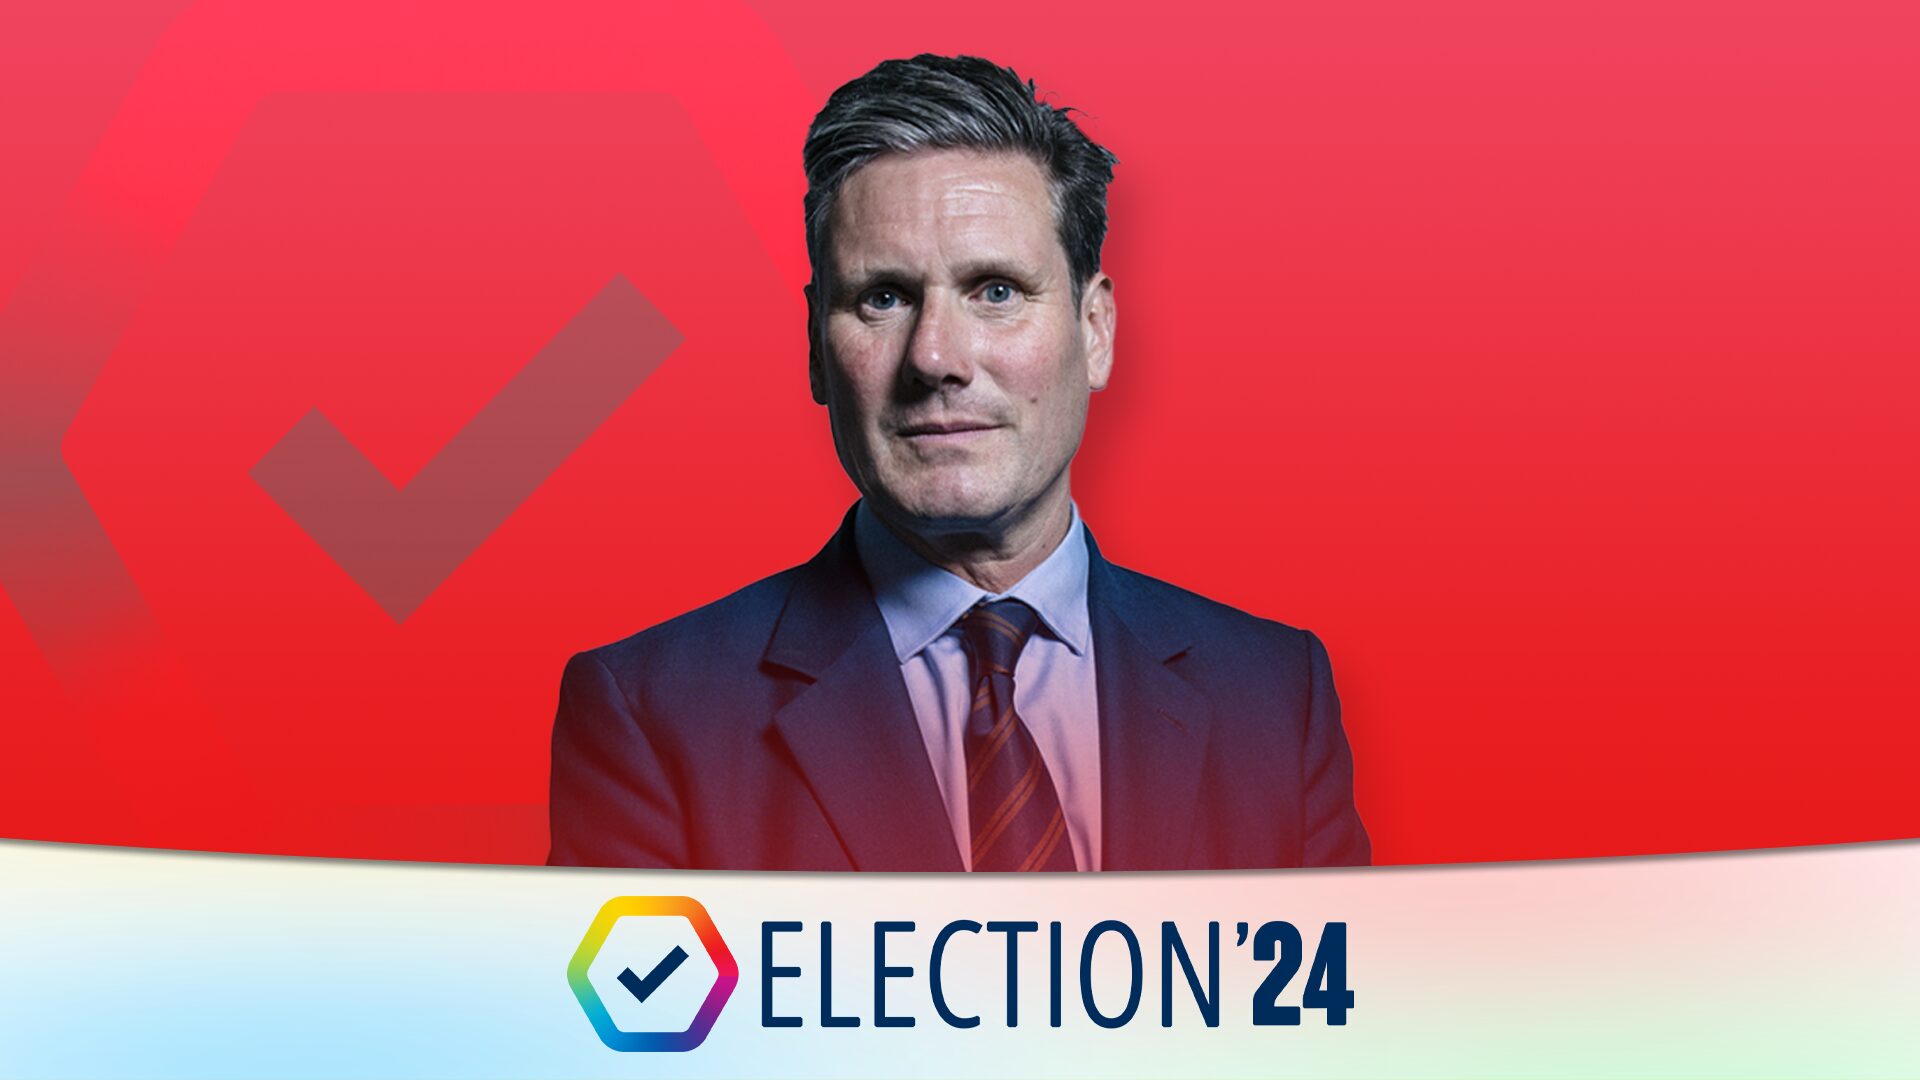 Sir Keir Starmer against a 'Labour red' background